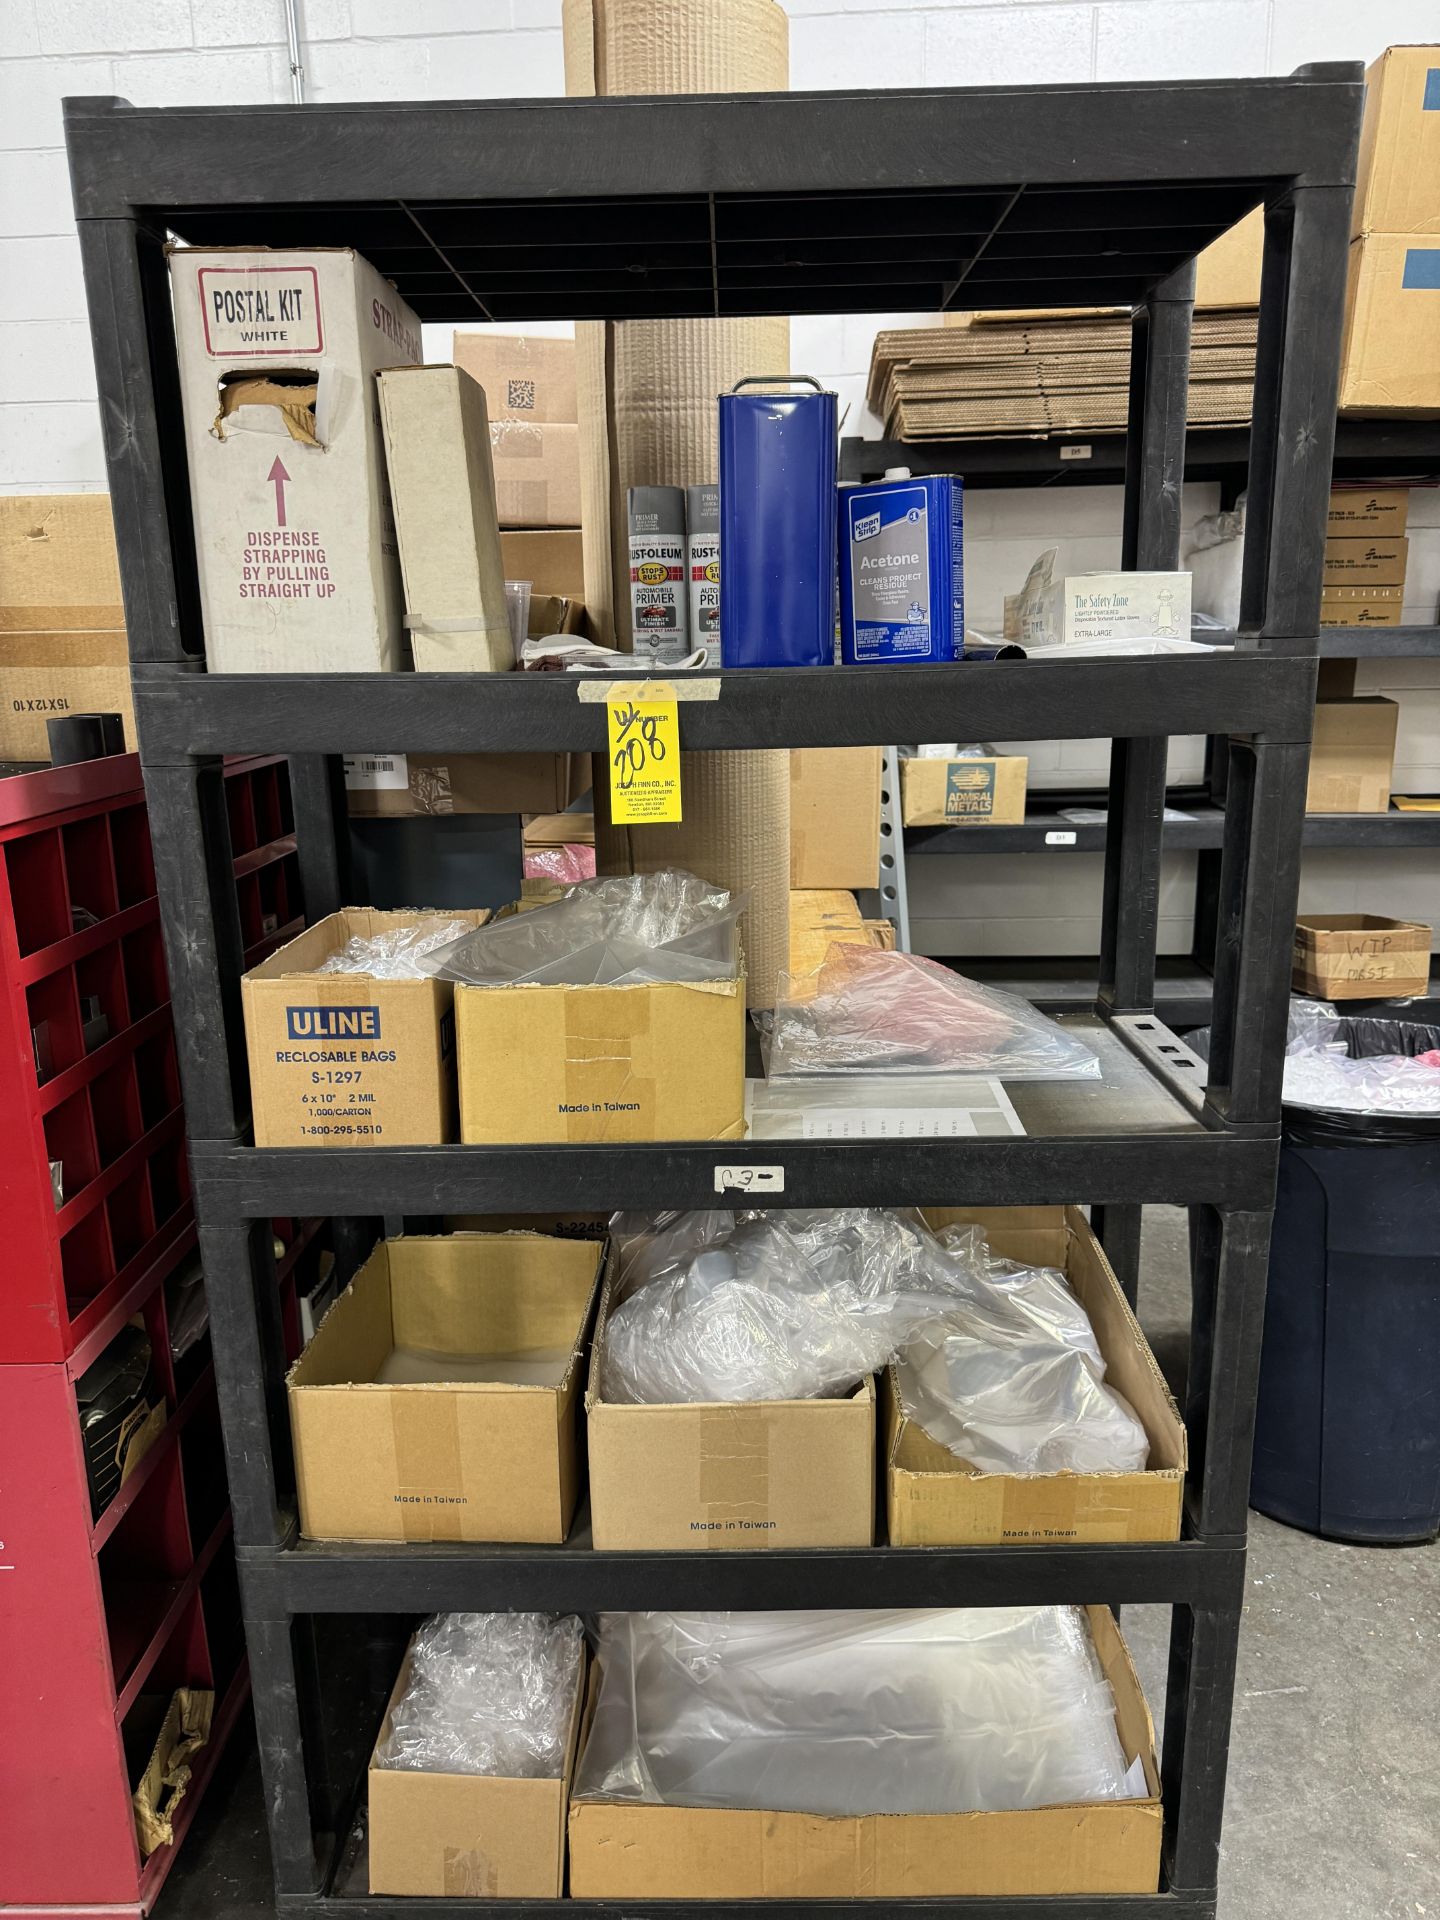 LOT Foam Shippers, Bubble Makers, Uline Plastic Bags, (6) Sections of Plastic Shelving, - Image 2 of 5